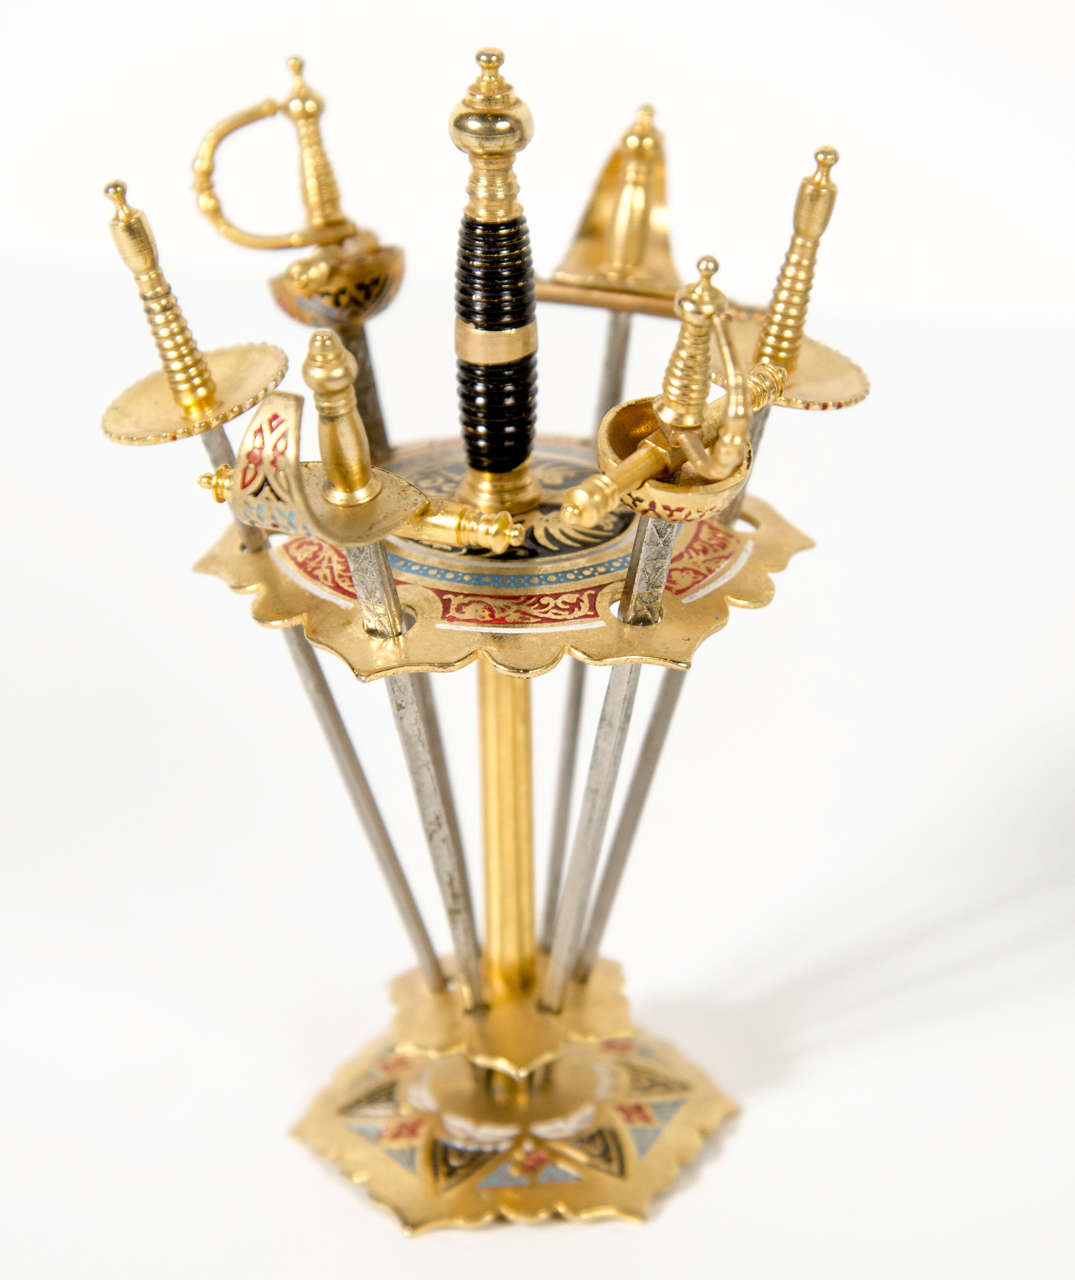 This gorgeous set features fine inlaid enamel work set in gilt brass detailing.